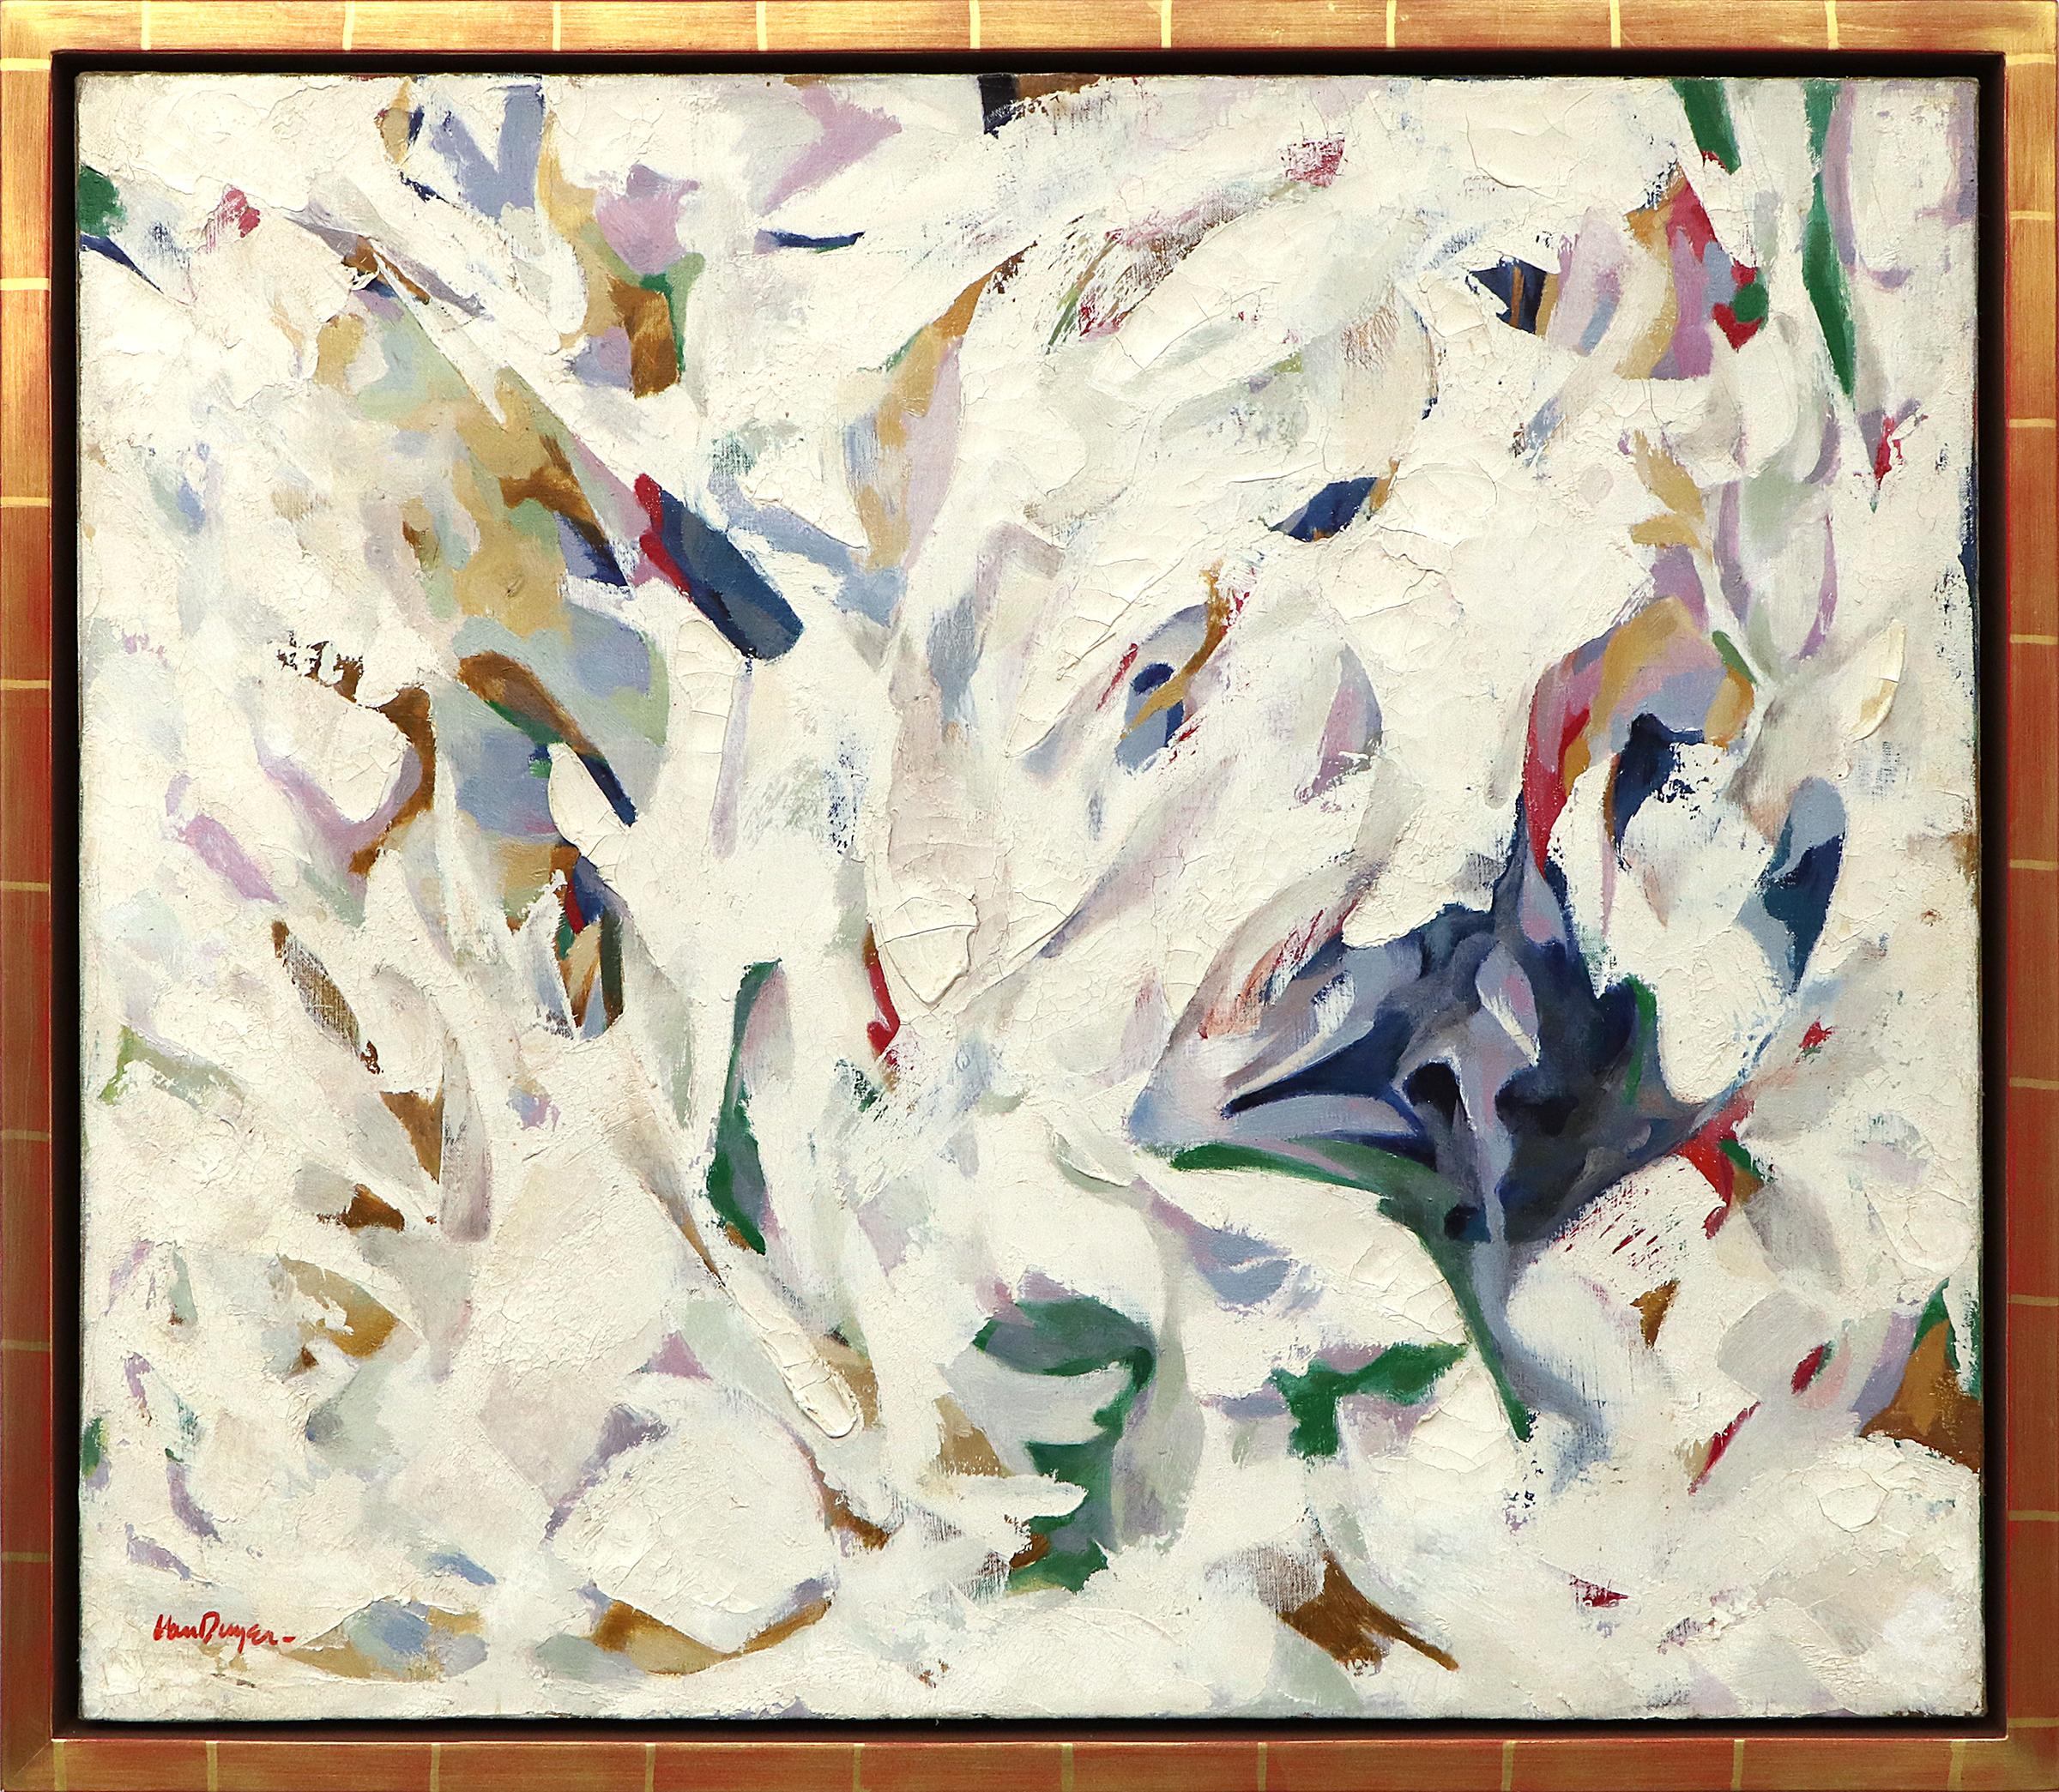 White and multicolor abstract oil on canvas painting by Clarence Van Duzer (1920-2009). Signed by the artist in the lower left corner. Presented in a custom frame measuring 26 ¼ x 30 ¼ inches; image size is 24 x 28 inches.

Abstract composition